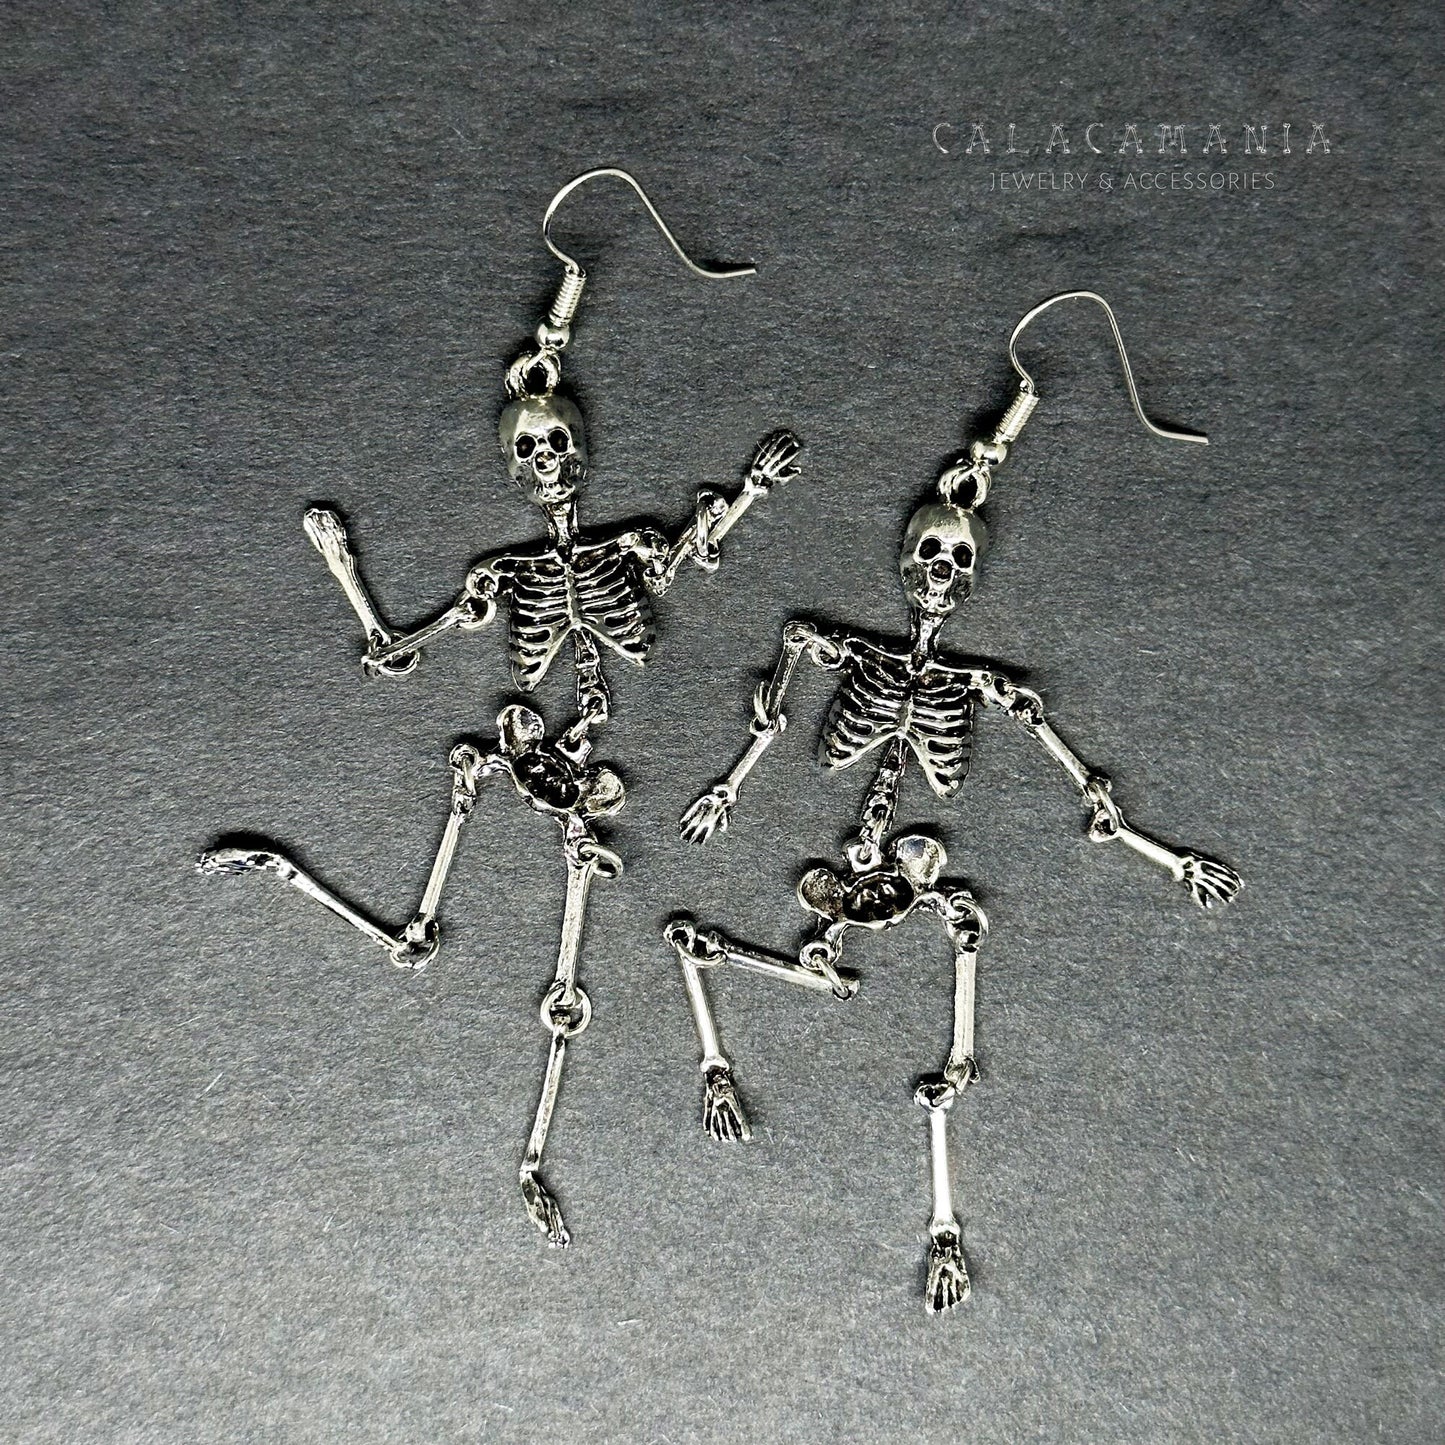 Articulated Skeleton Earrings Silver Metallic Finish Drop Dangle Skull Jewelry Halloween Day of the Dead Fashion Woman Girl Aretes Esqueleto